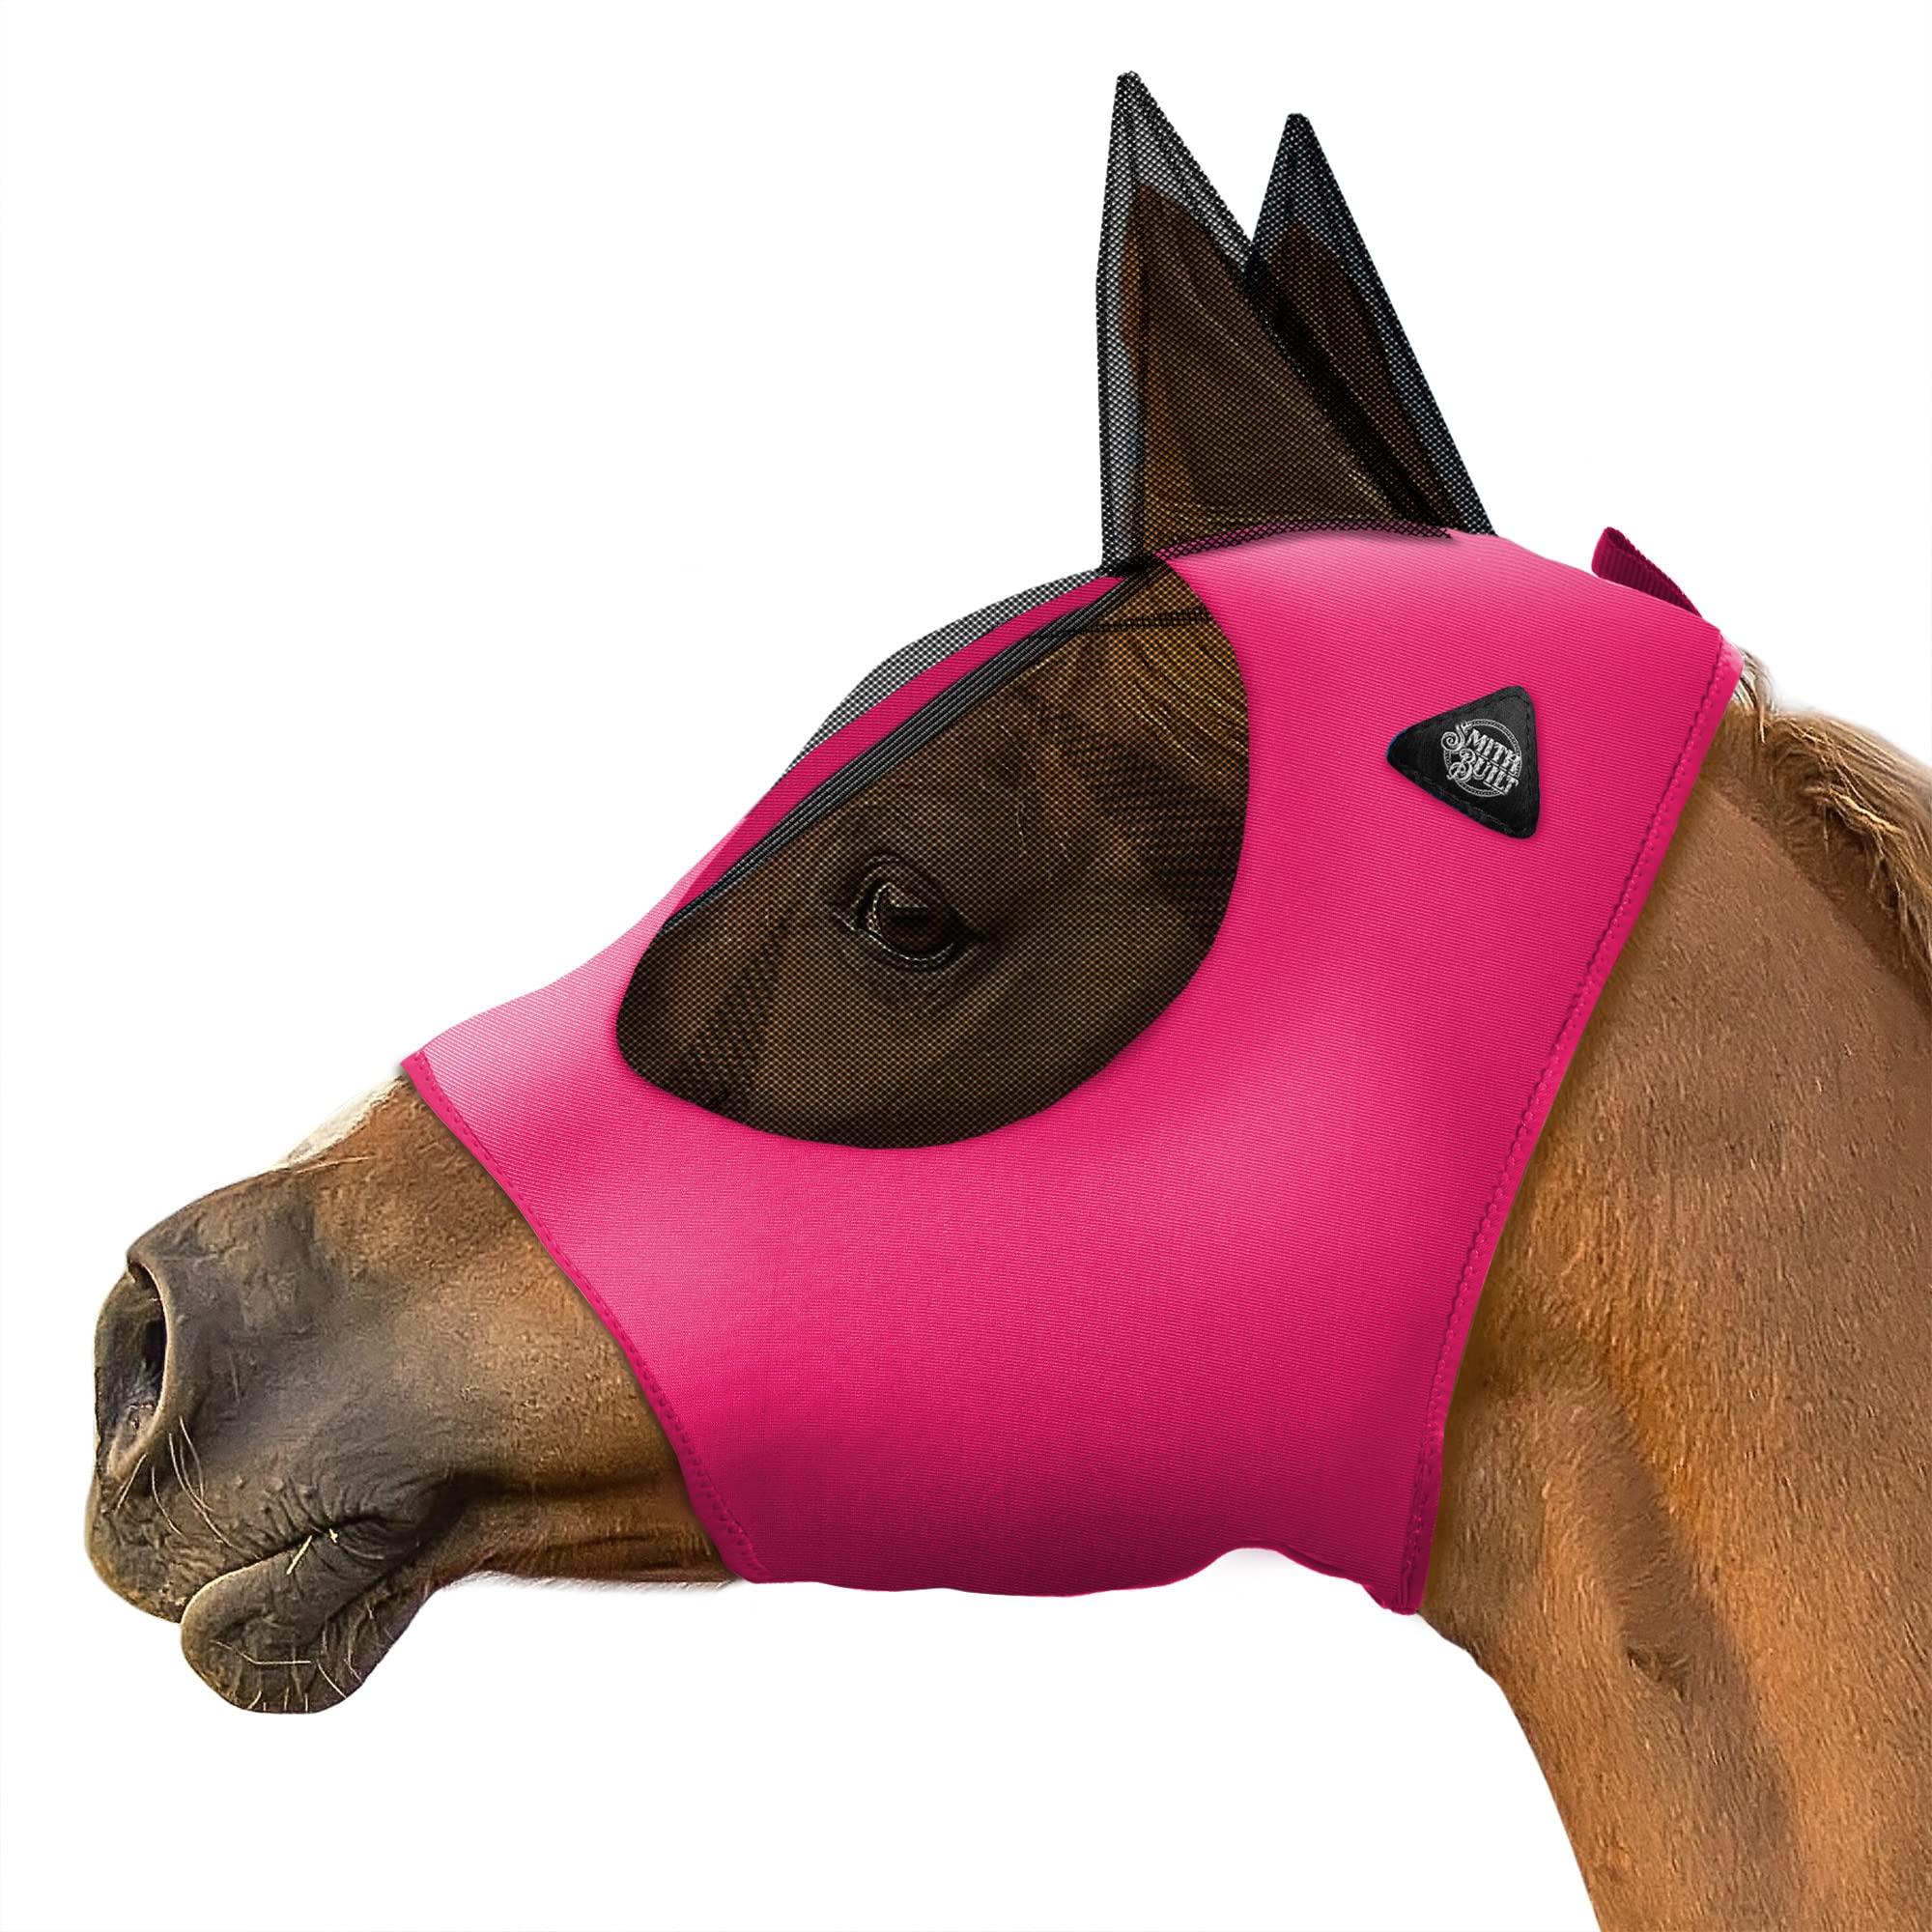 SmithBuilt Horse Fly Mask (Pink, Cob) - Mesh Eyes and Ears, Breathable Fabric, UV Protection